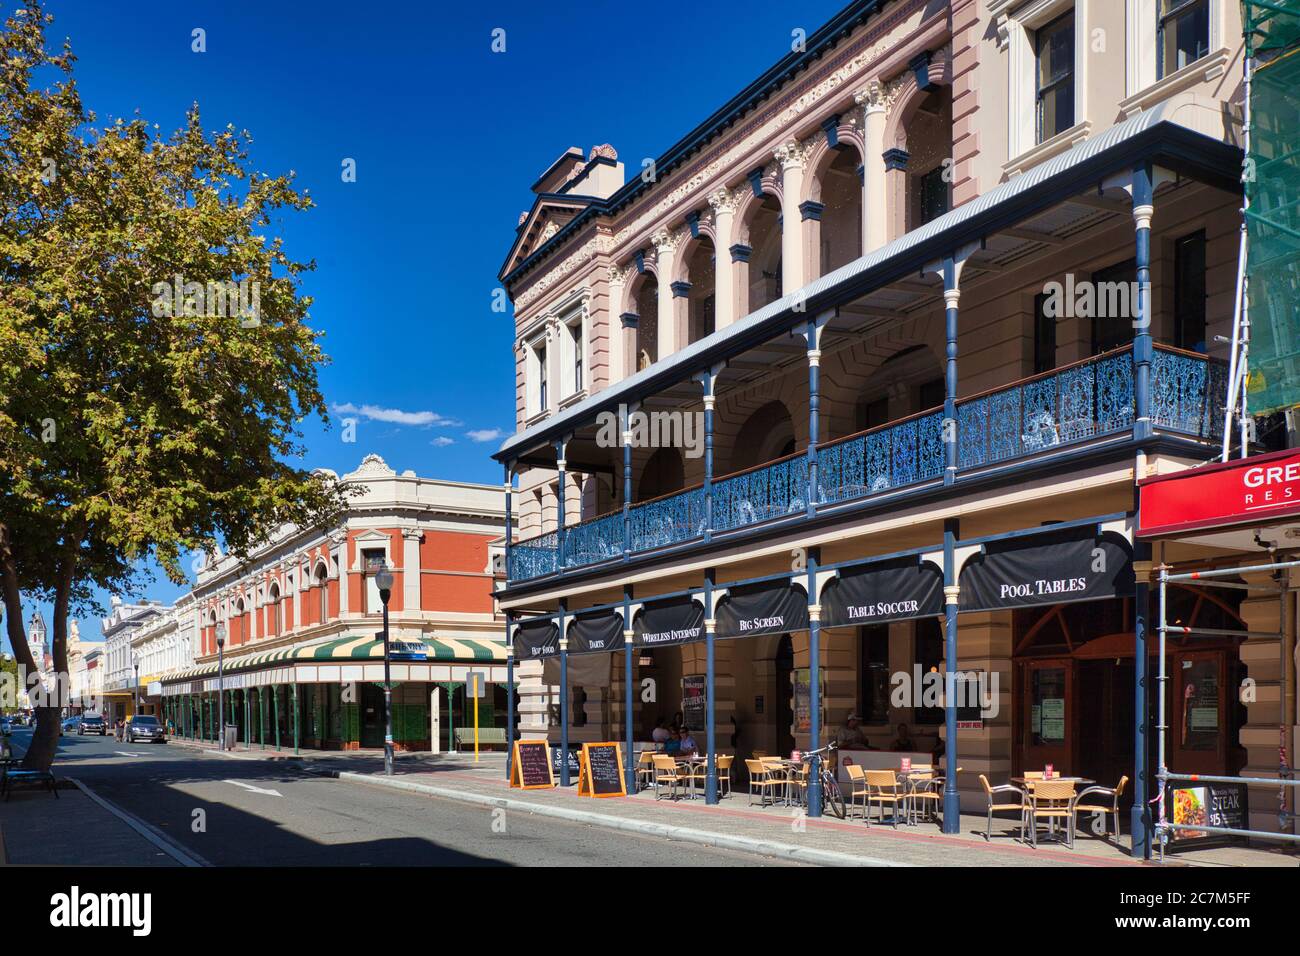 Typical older style buildings with arches and verandas with pretty wrought iron railings on a street in Fremantle, Western Australia. Stock Photo